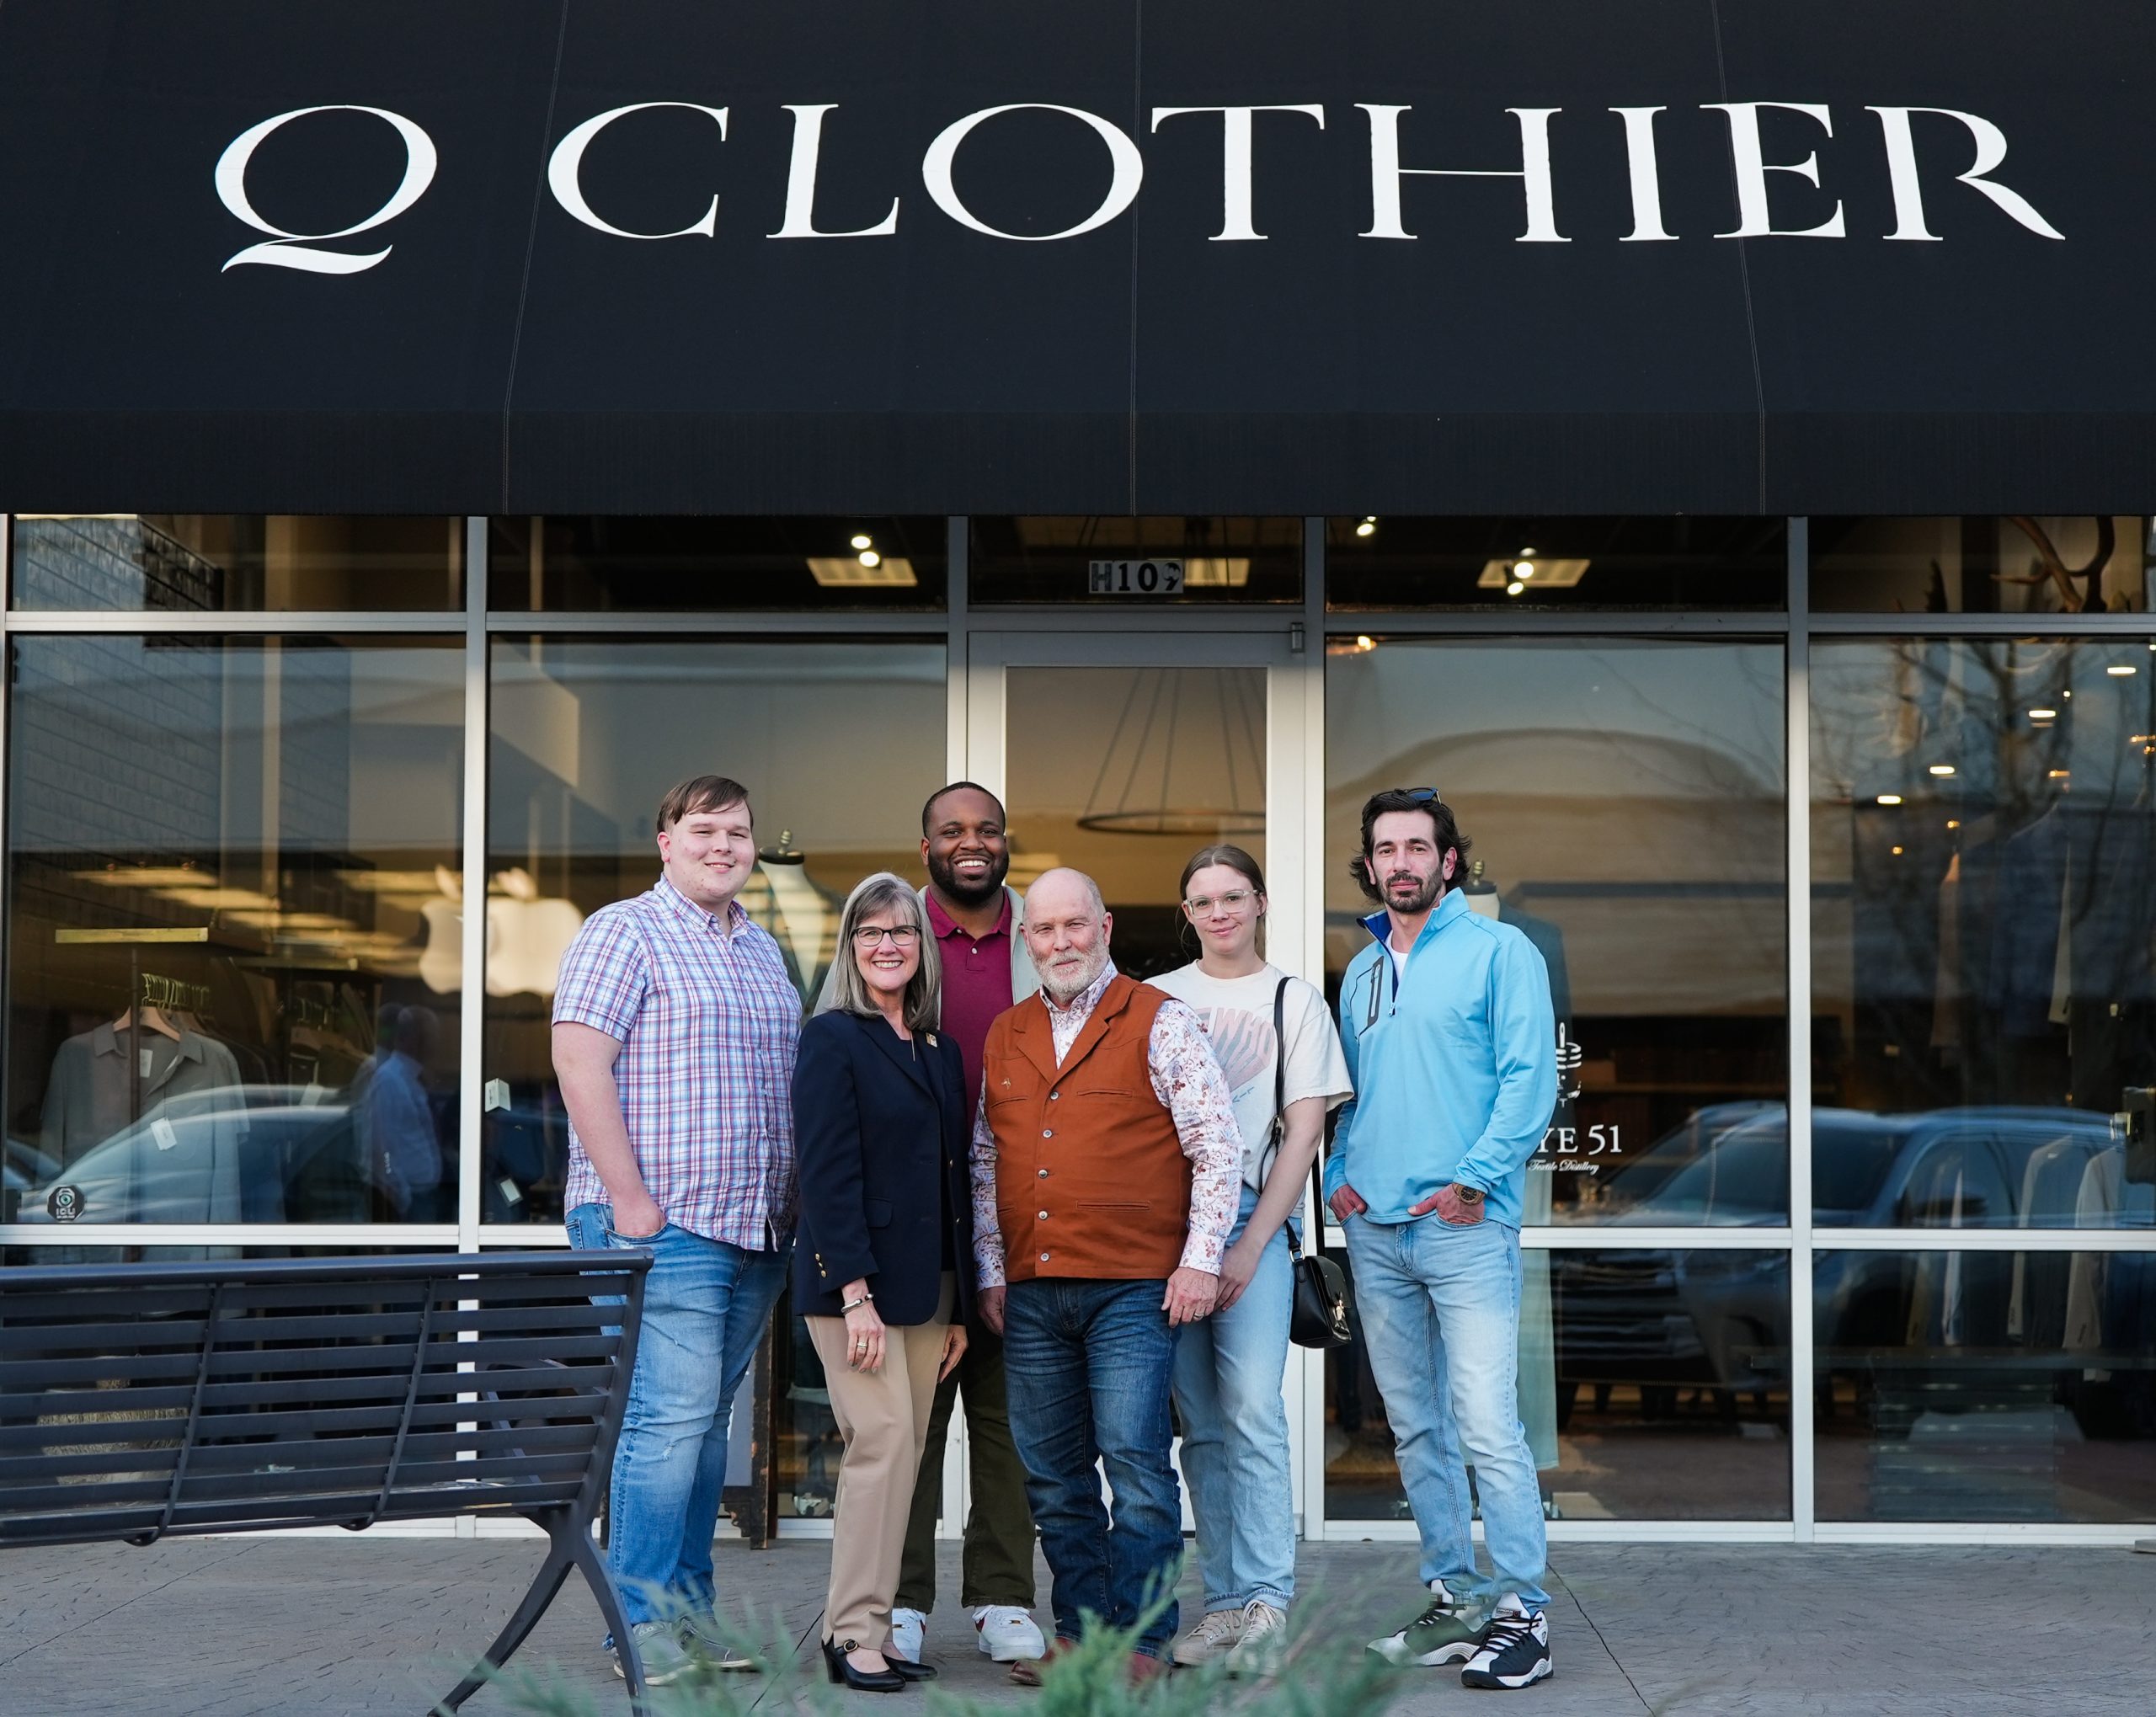 Paul Rainwater (center), owner of Q Clothier, has donated his time and talents to create custom business outfits for UA Little Rock students competing in a national real estate competition. The people include, from left to right, Adison Cummings, Elizabeth Small, Lamar Townsend, Paul Rainwater, Ashlin Graveline, and Osman Bagandov. Photo by Ahmed Elkhattabi.